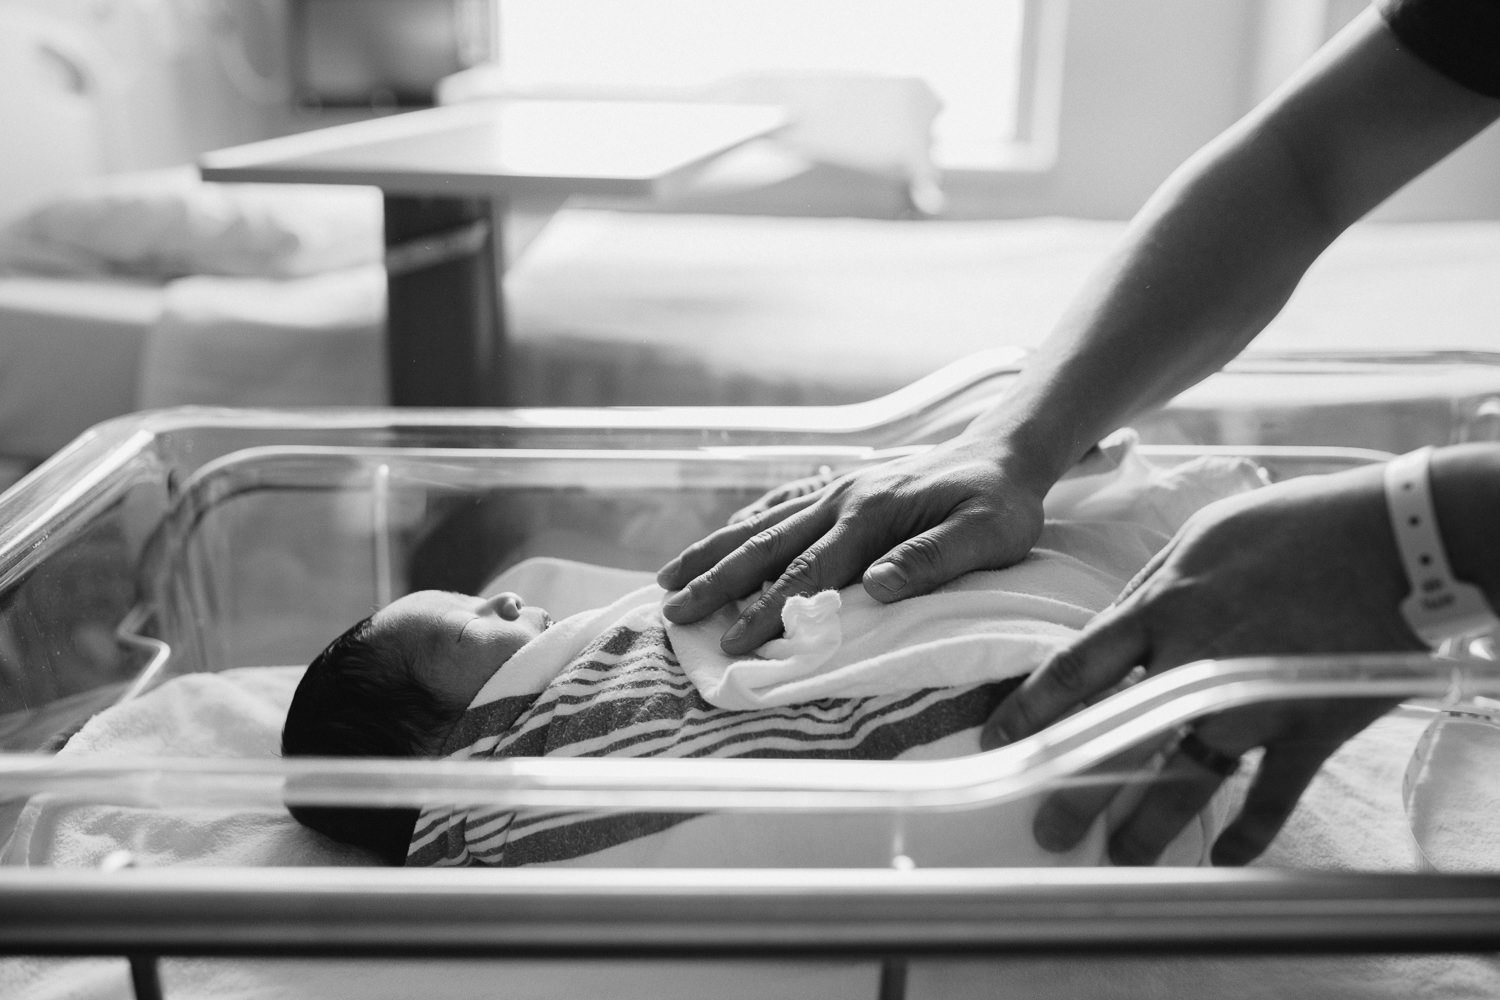 new father's hand resting on 1 day old baby son sleeping in hospital bassinet - Stouffville Fresh 48 photos